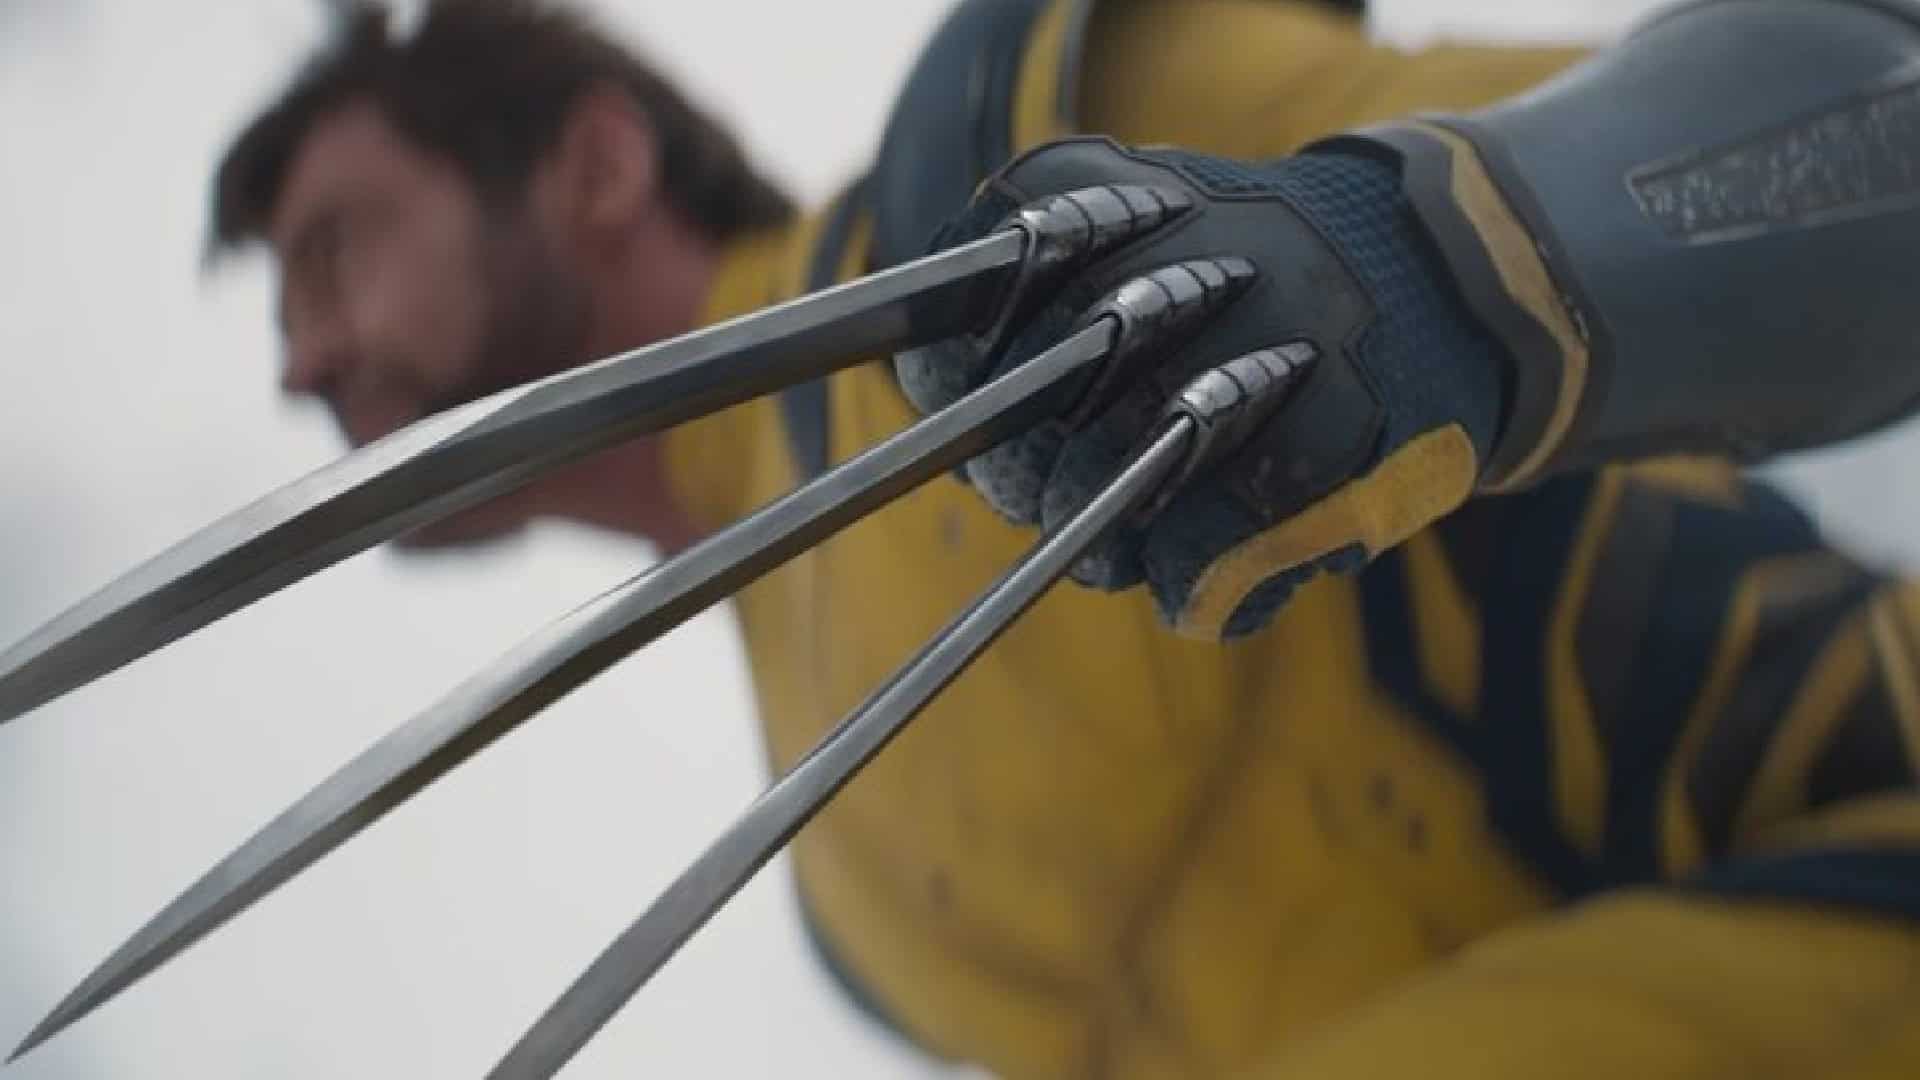 Wolverine Raised The Son Of His Worst Enemy | GIANT FREAKIN ROBOT